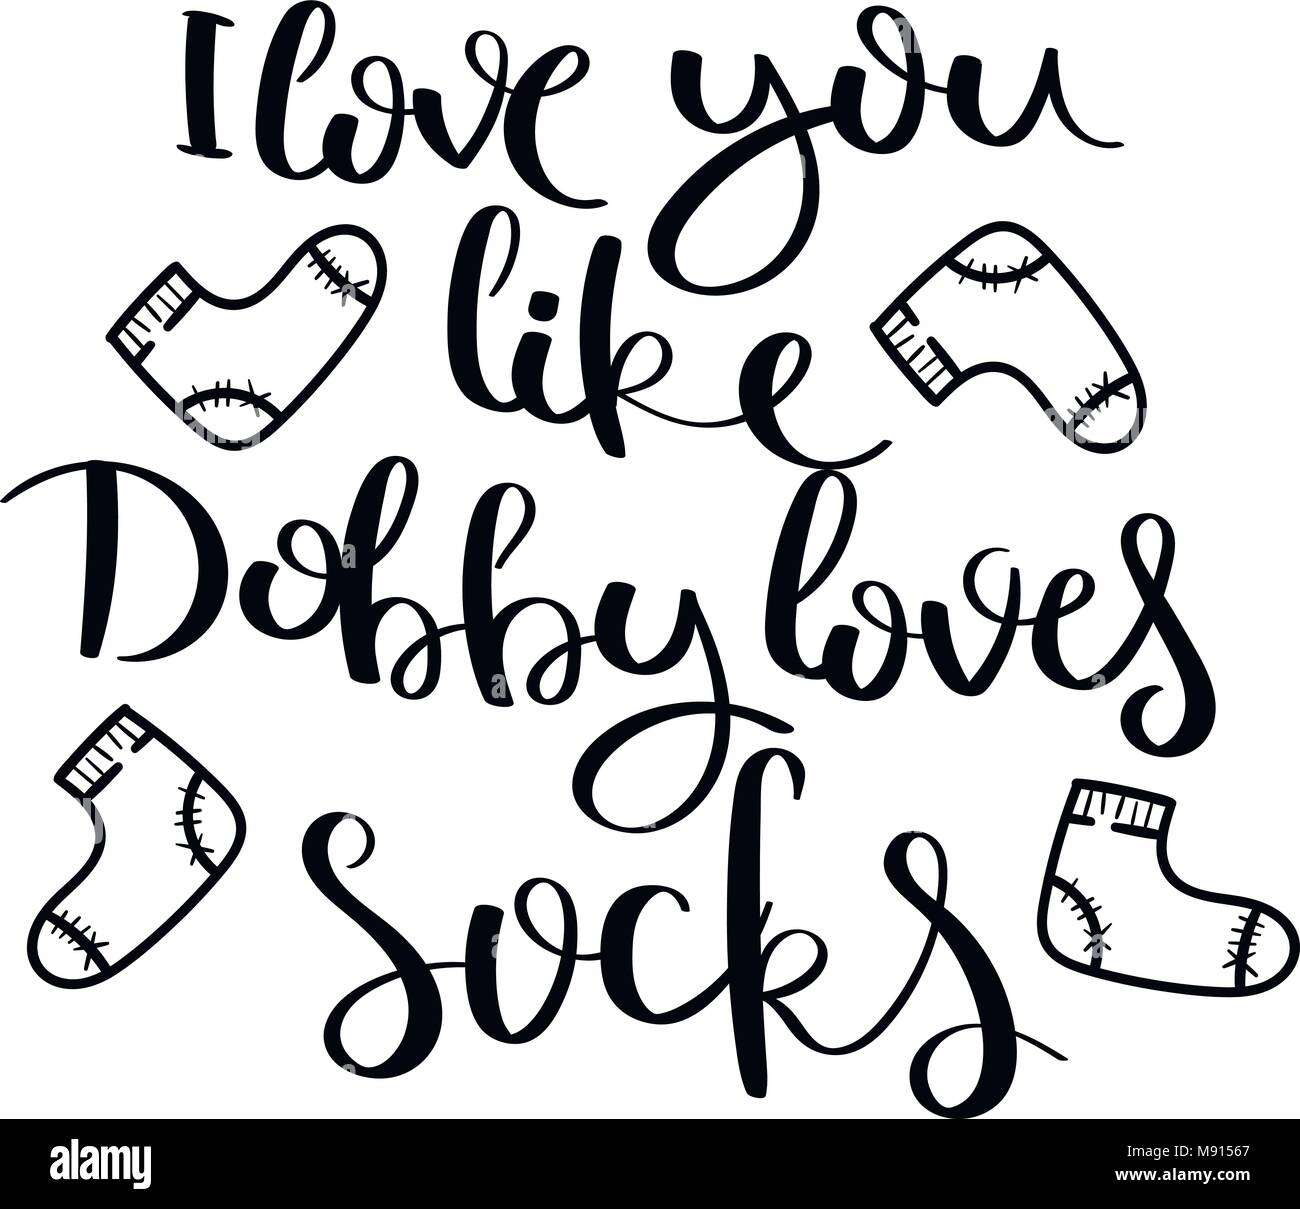 I Love You Like Dobby Loves Socks Hand Written Calligraphy Quote Motivation For Life And Happiness For Postcard Poster Prints Cards Graphic Desig Stock Vector Image Art Alamy